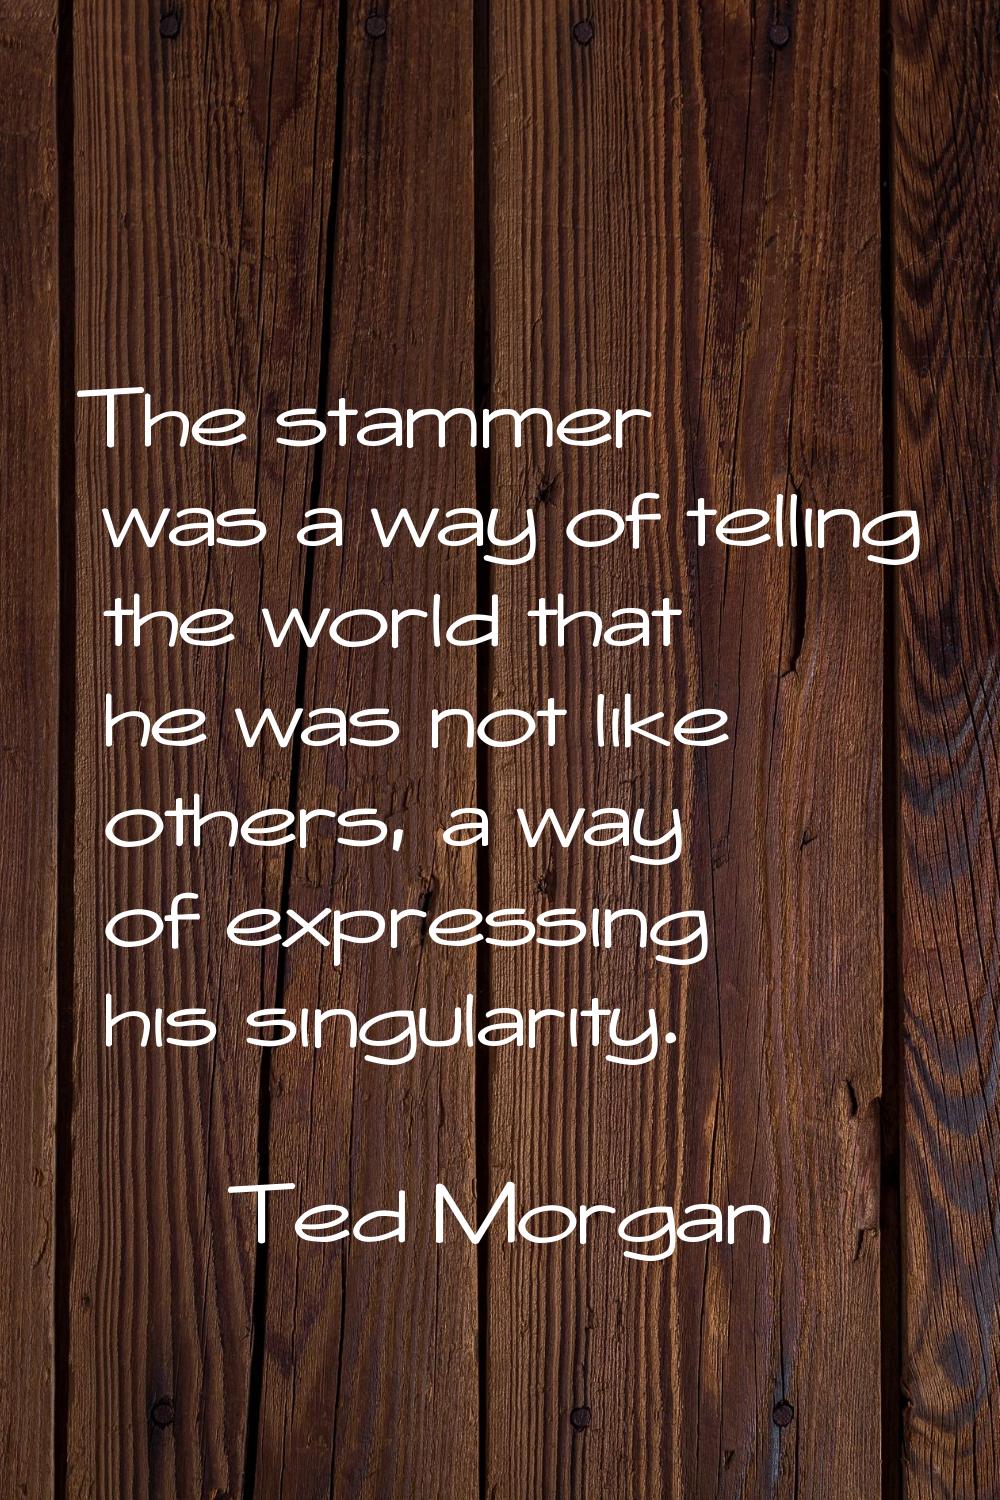 The stammer was a way of telling the world that he was not like others, a way of expressing his sin